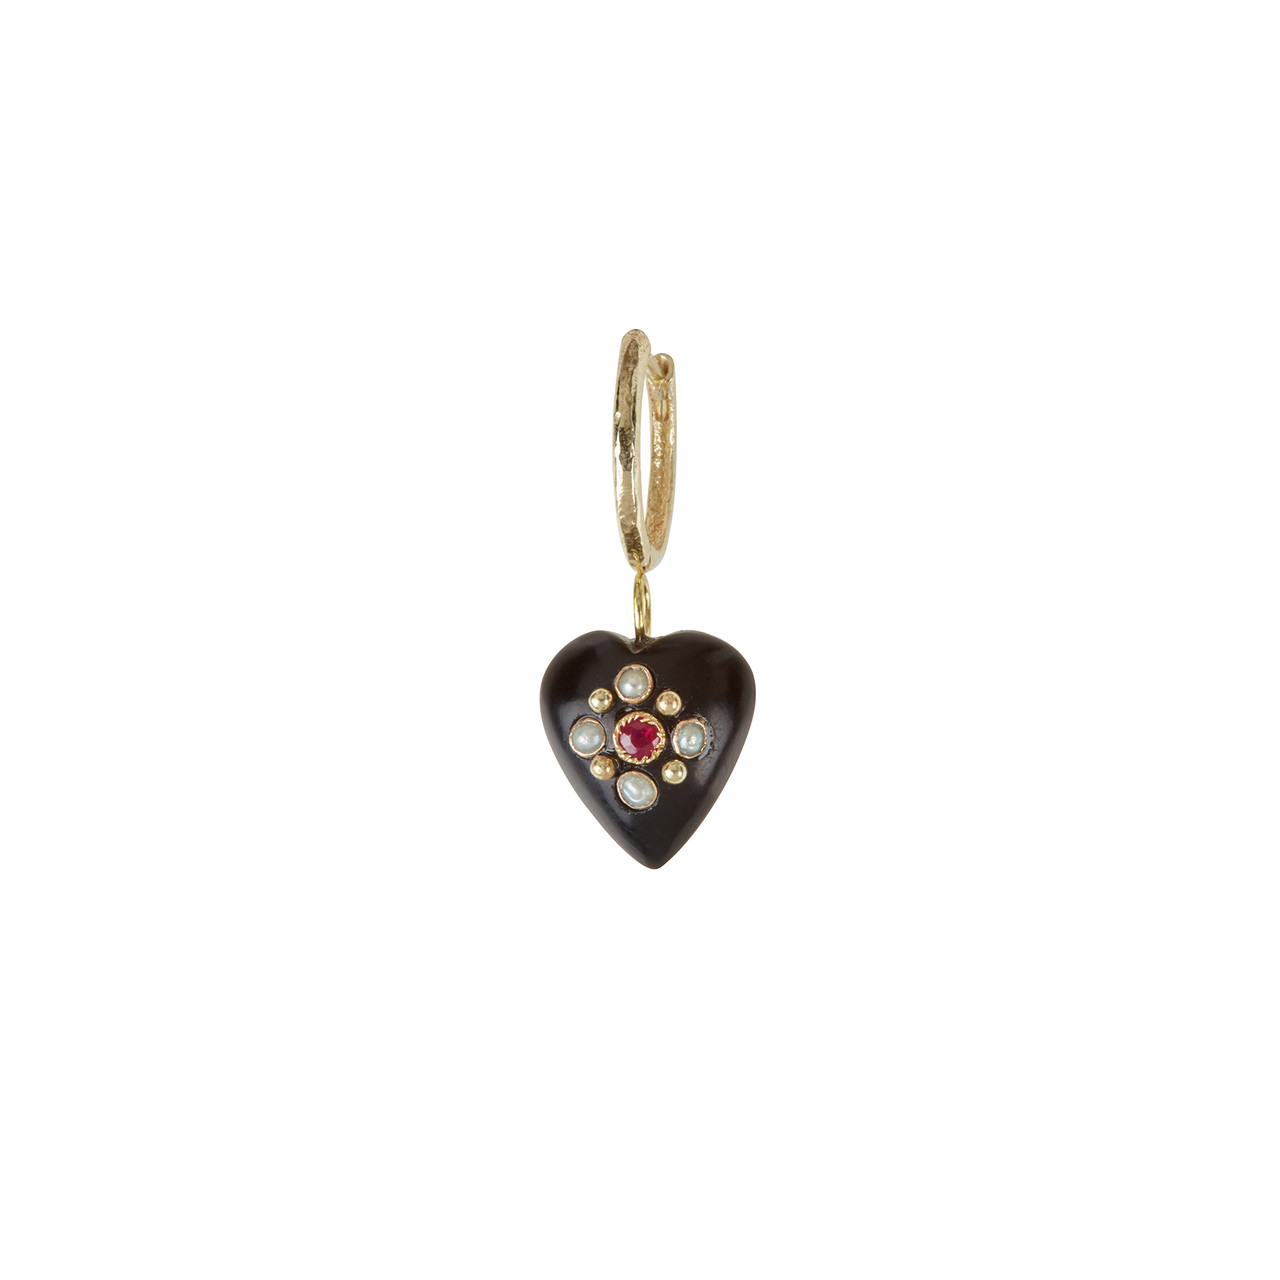 Single Heart Hoop Earring by 5 Octobre available to shop online at tomfoolery London.